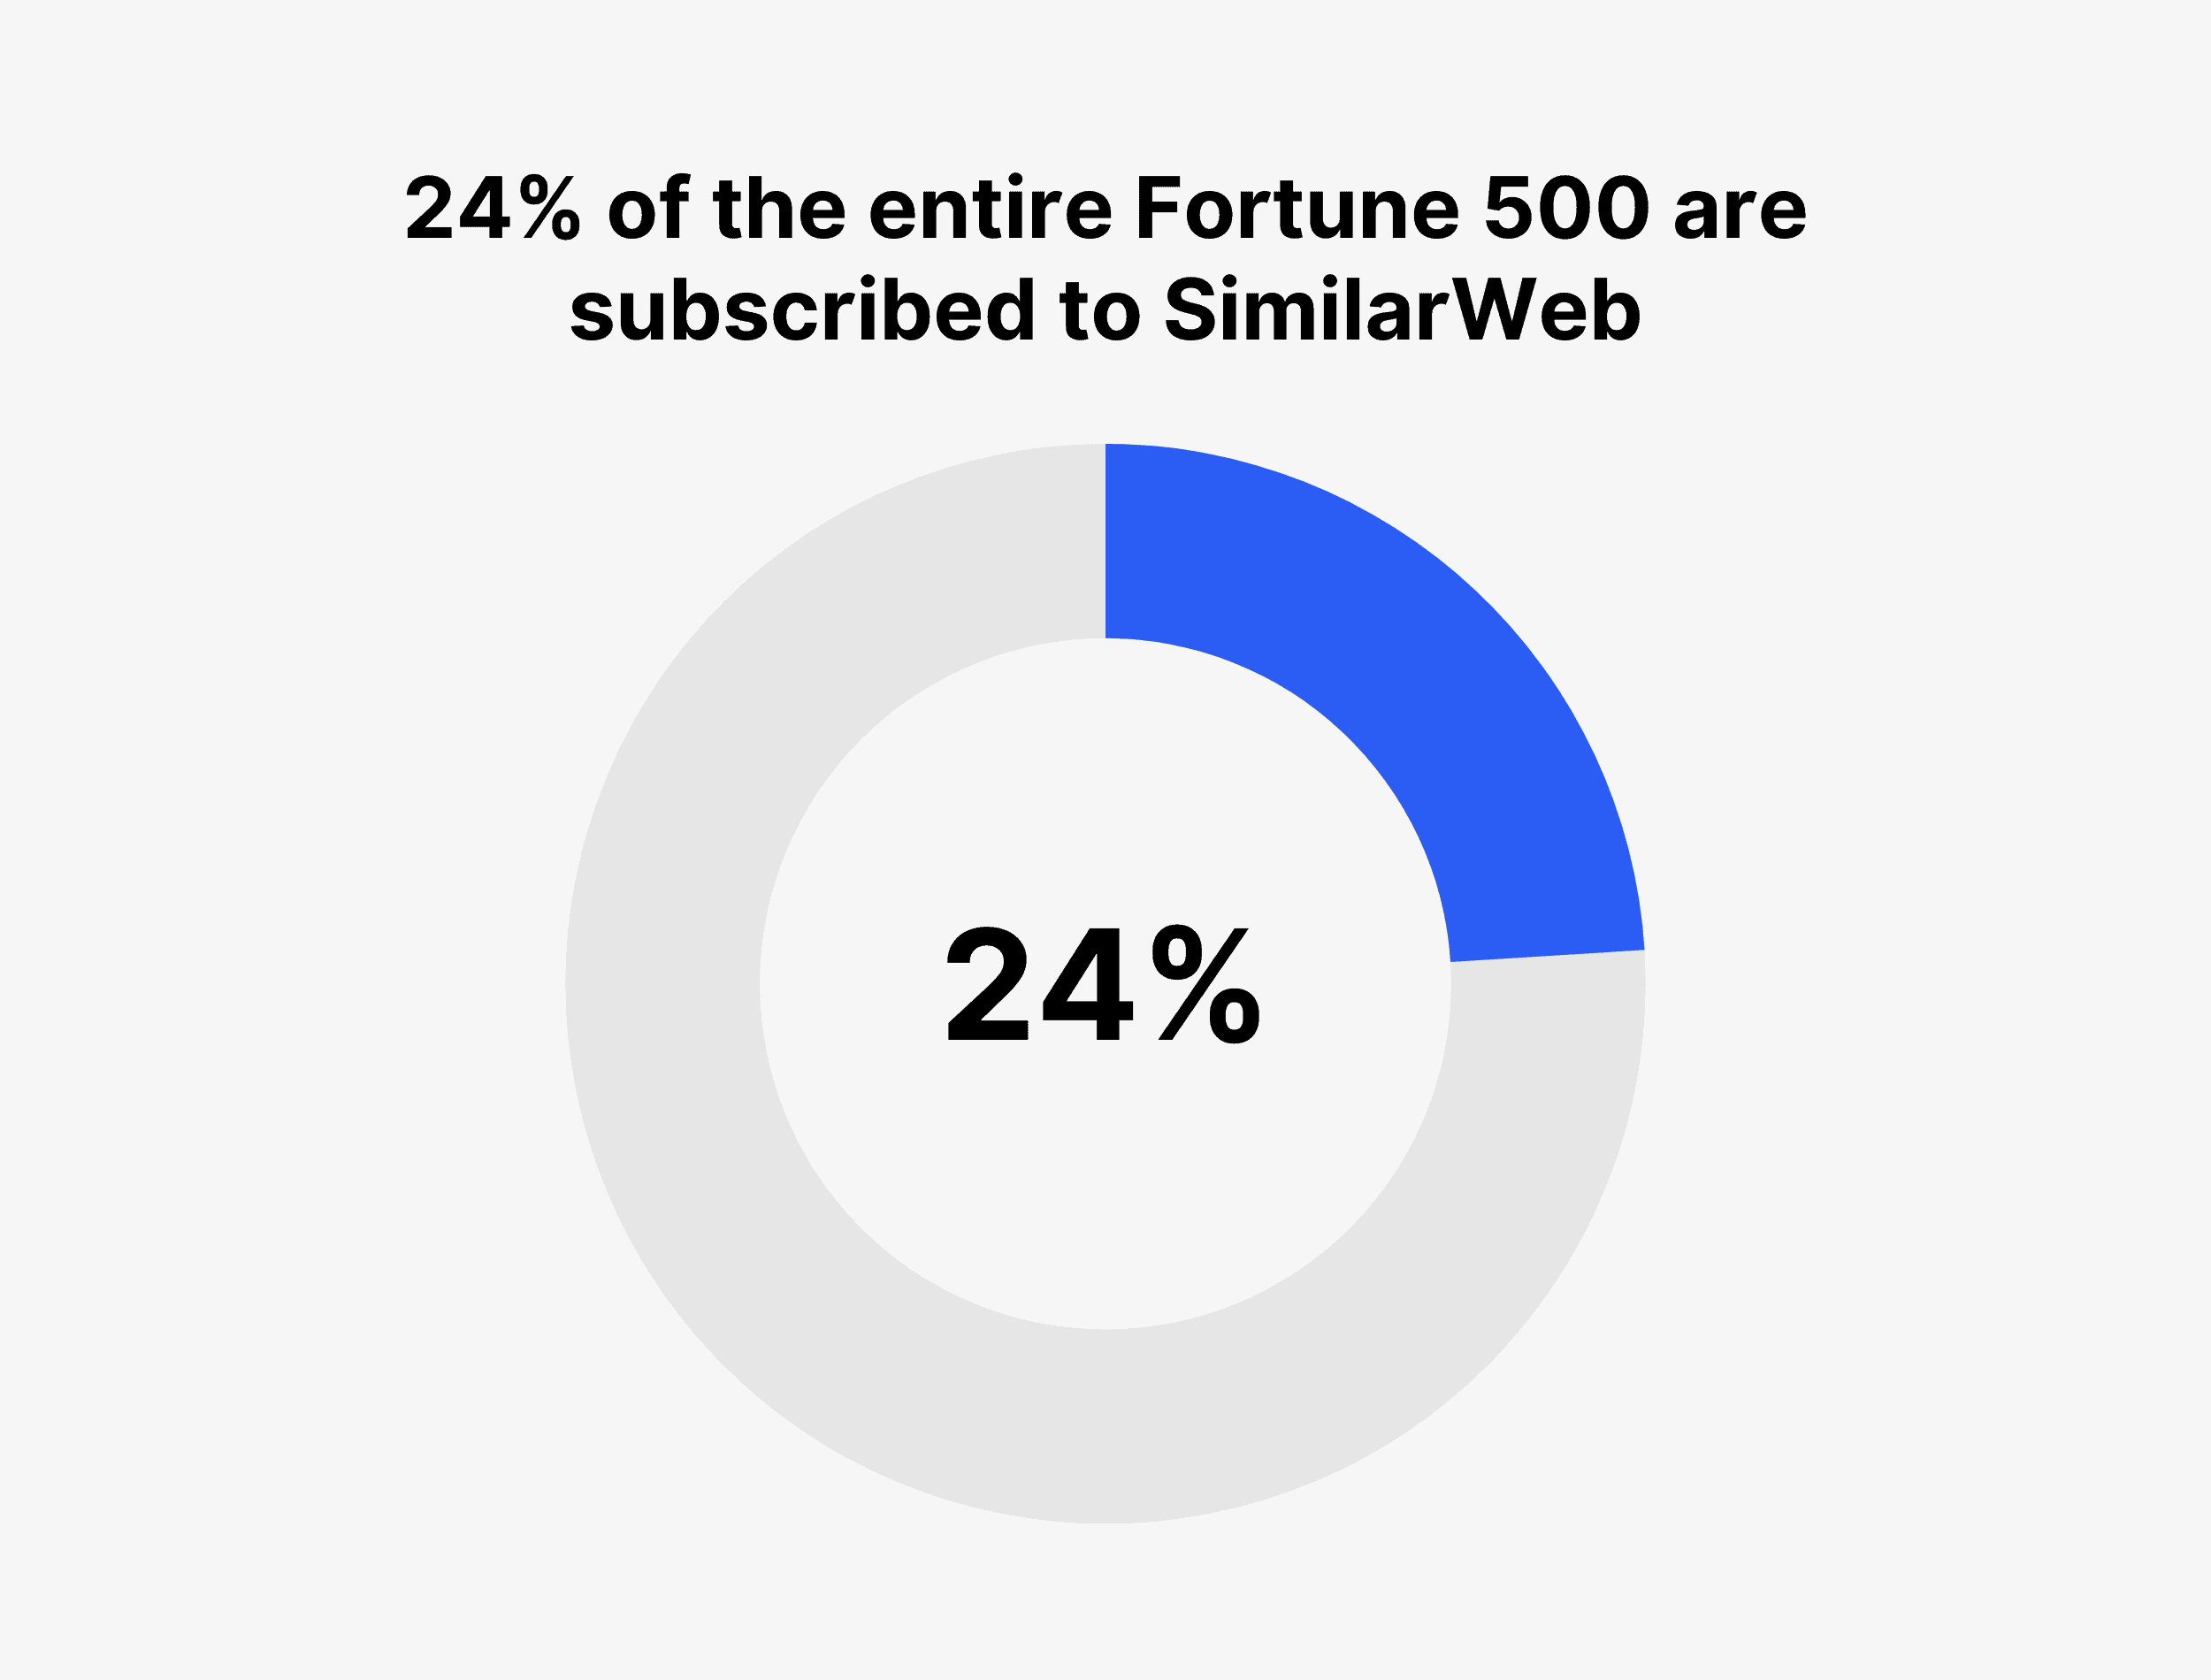 24% of the entire Fortune 500 are subscribed to SimilarWeb